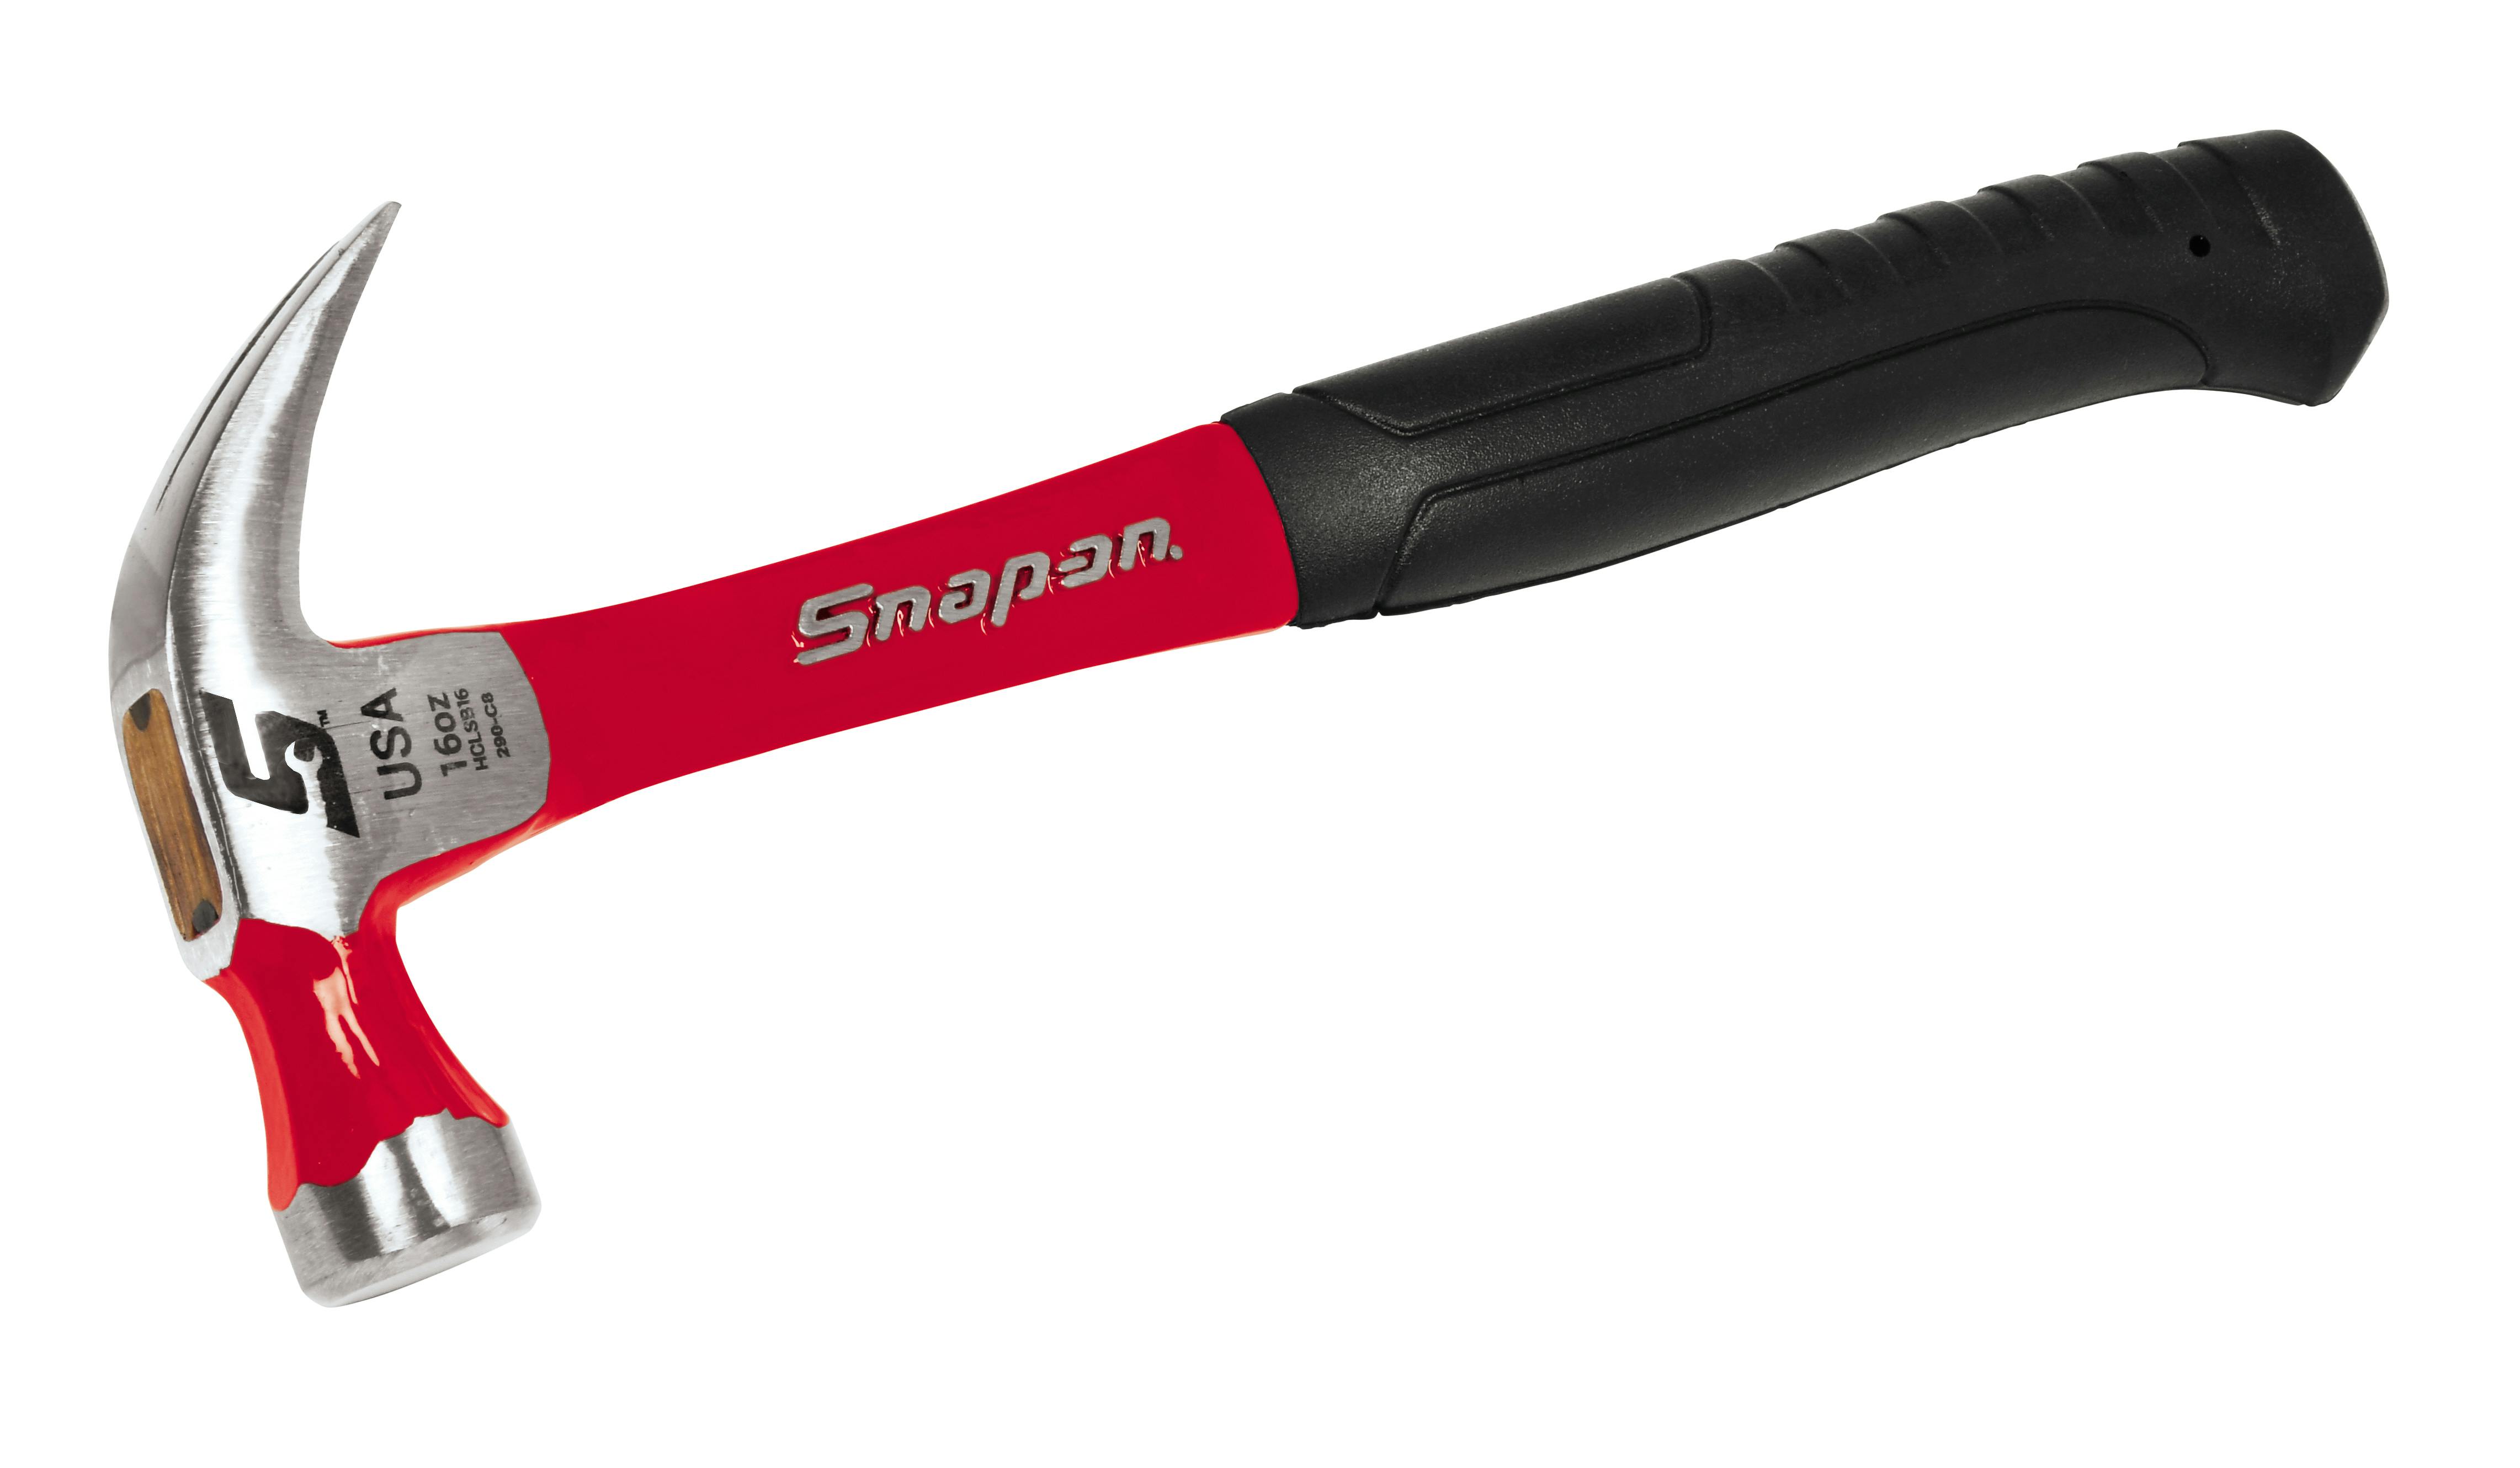 16 oz Claw Hammer (Red/Black) HCLSB16 Snap-on Store